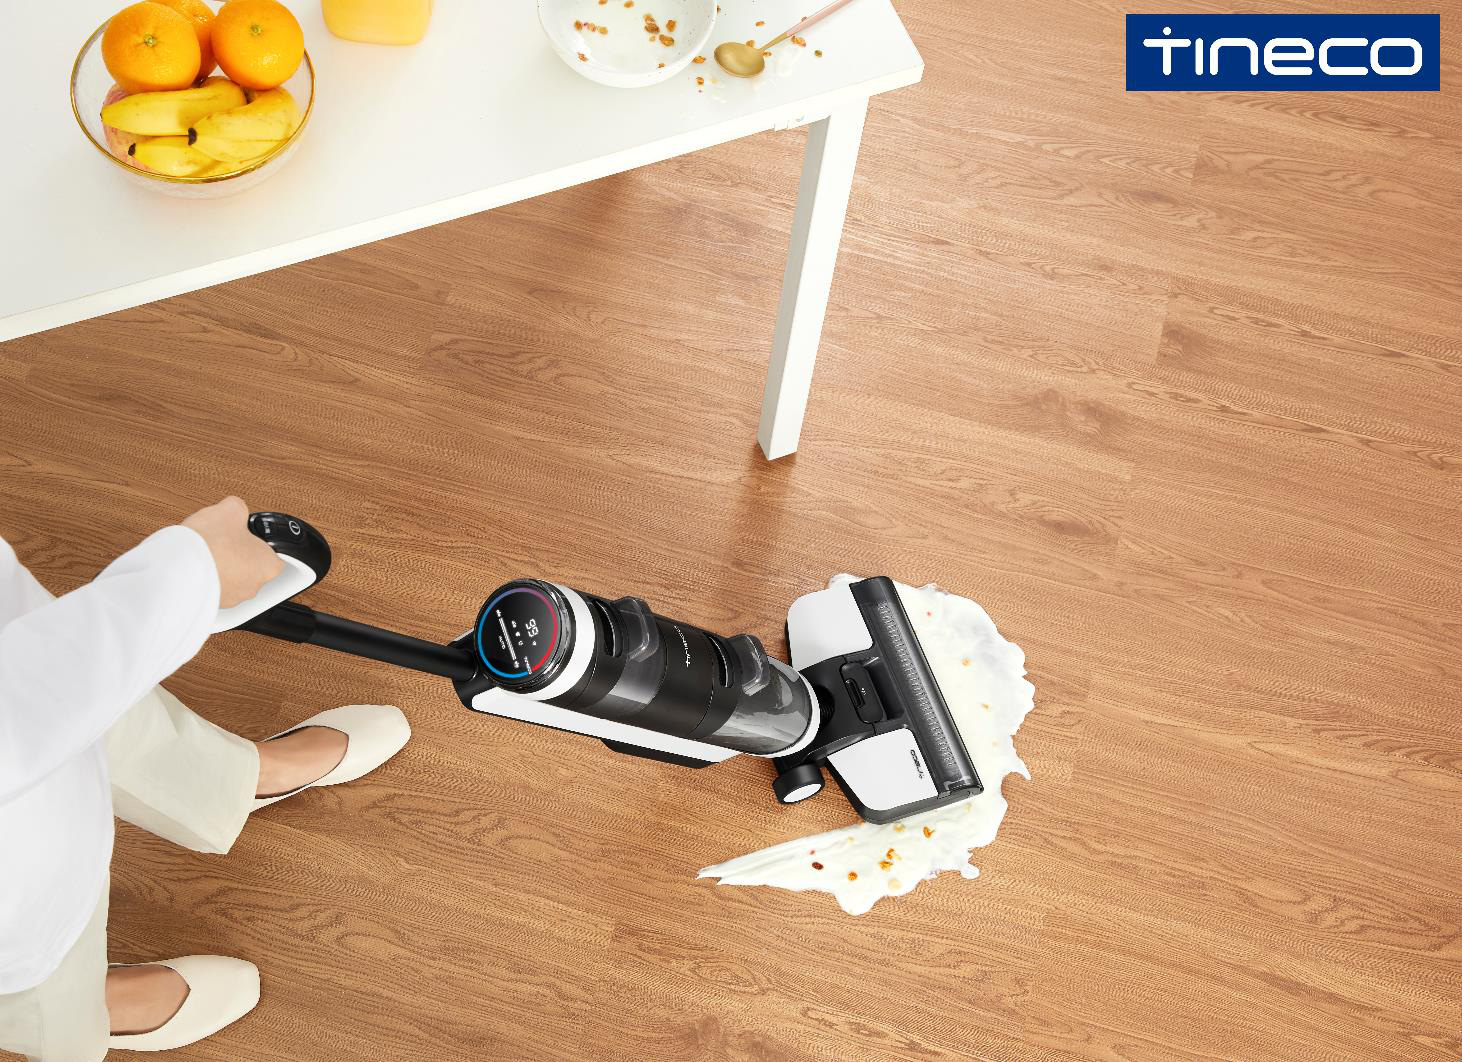 Tineco - Amazon's top brand of floor cleaner and vacuum cleaner stirs up 